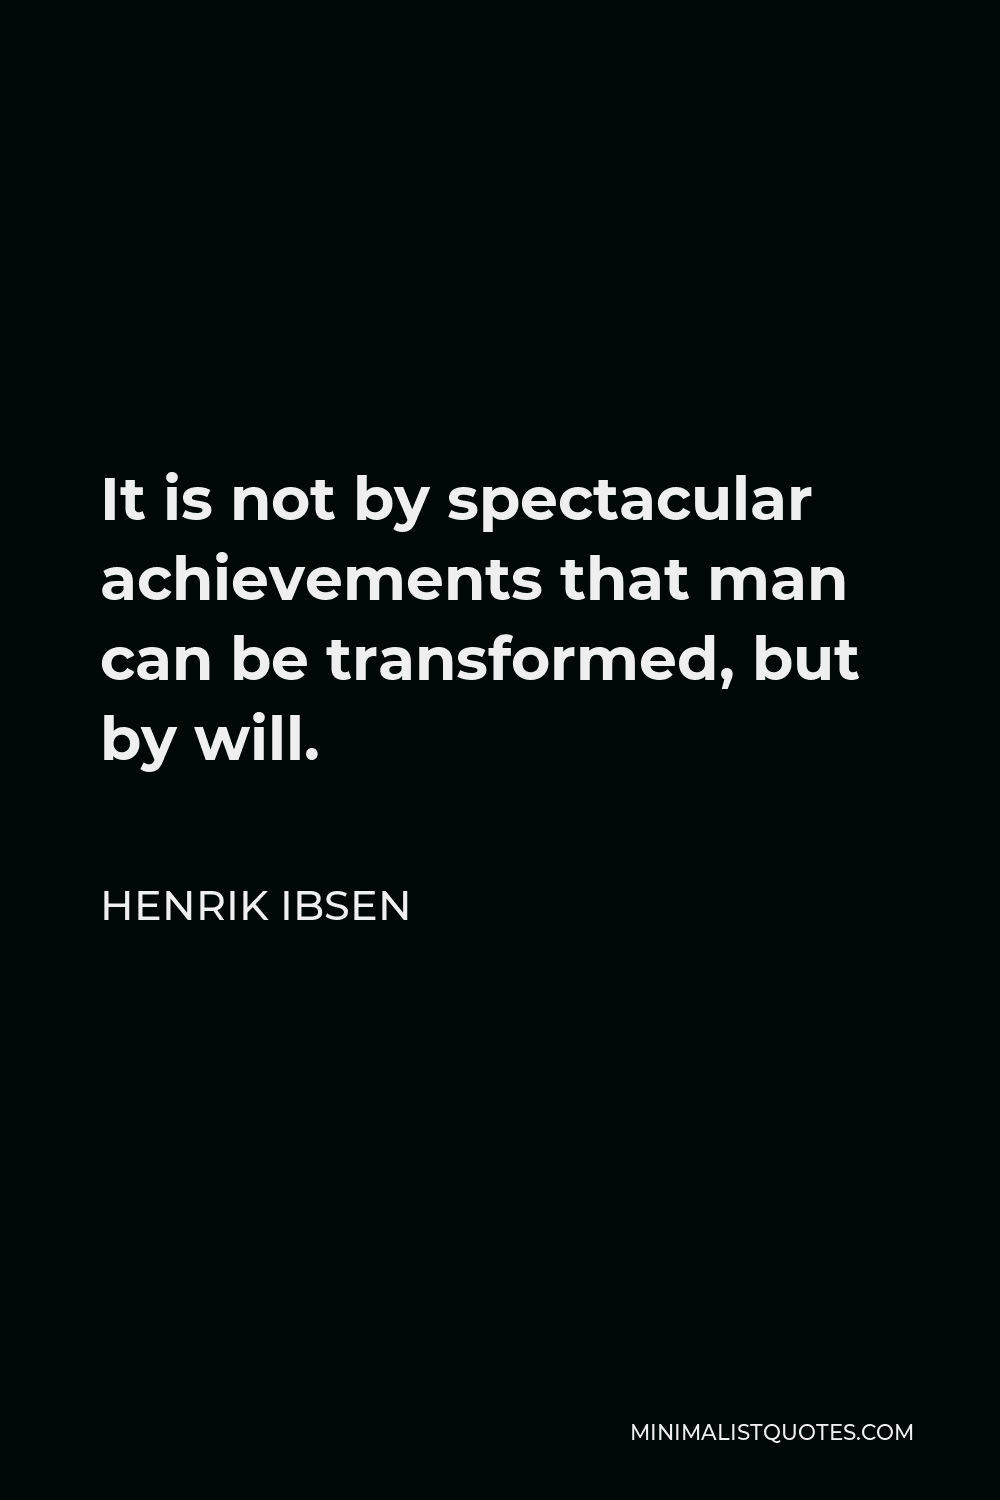 Henrik Ibsen Quote - It is not by spectacular achievements that man can be transformed, but by will.